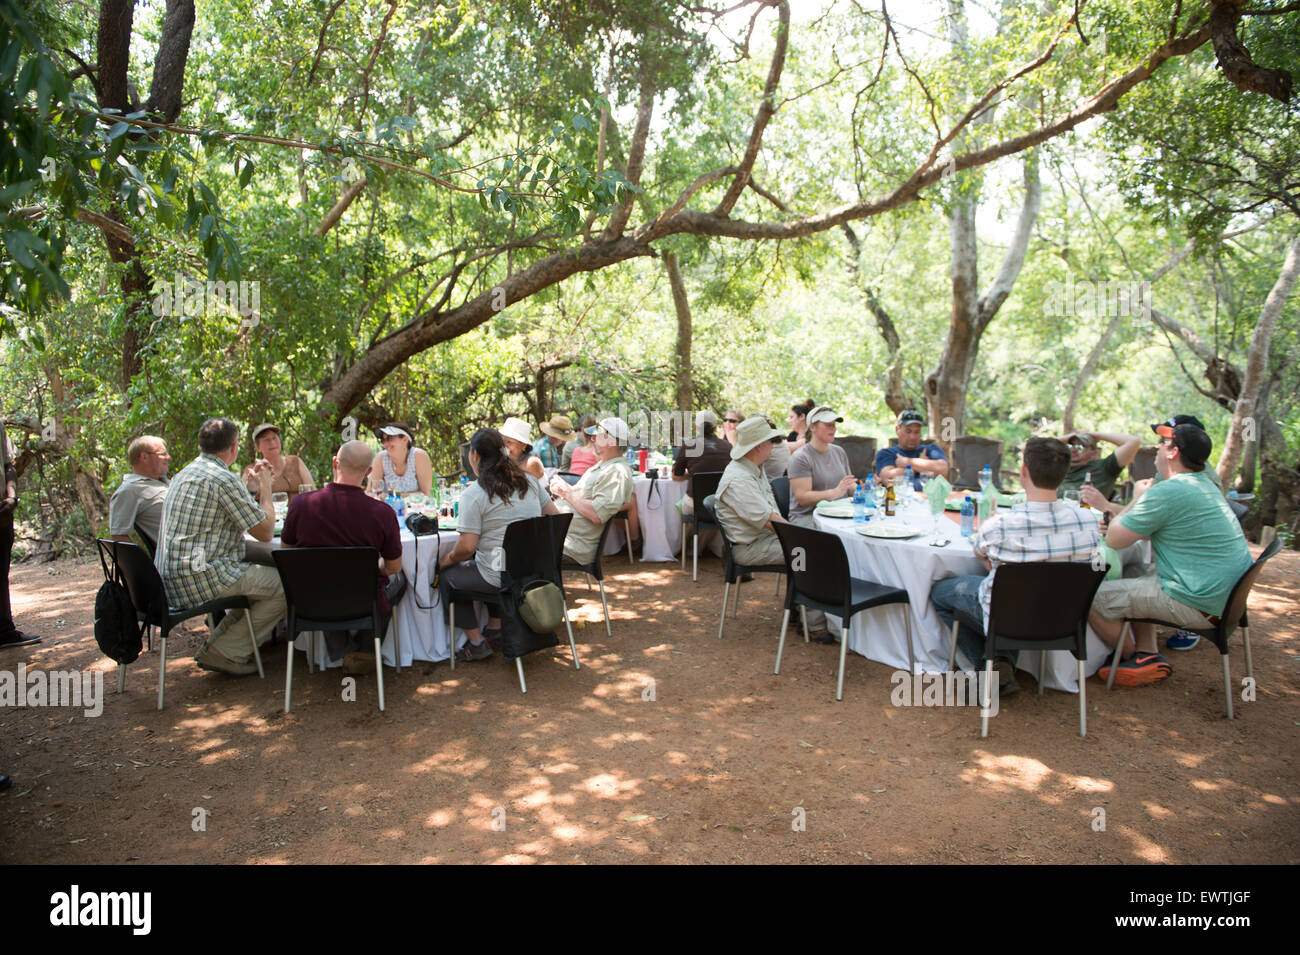 SOUTH AFRICA- Group sitting down for dinner outdoors Stock Photo